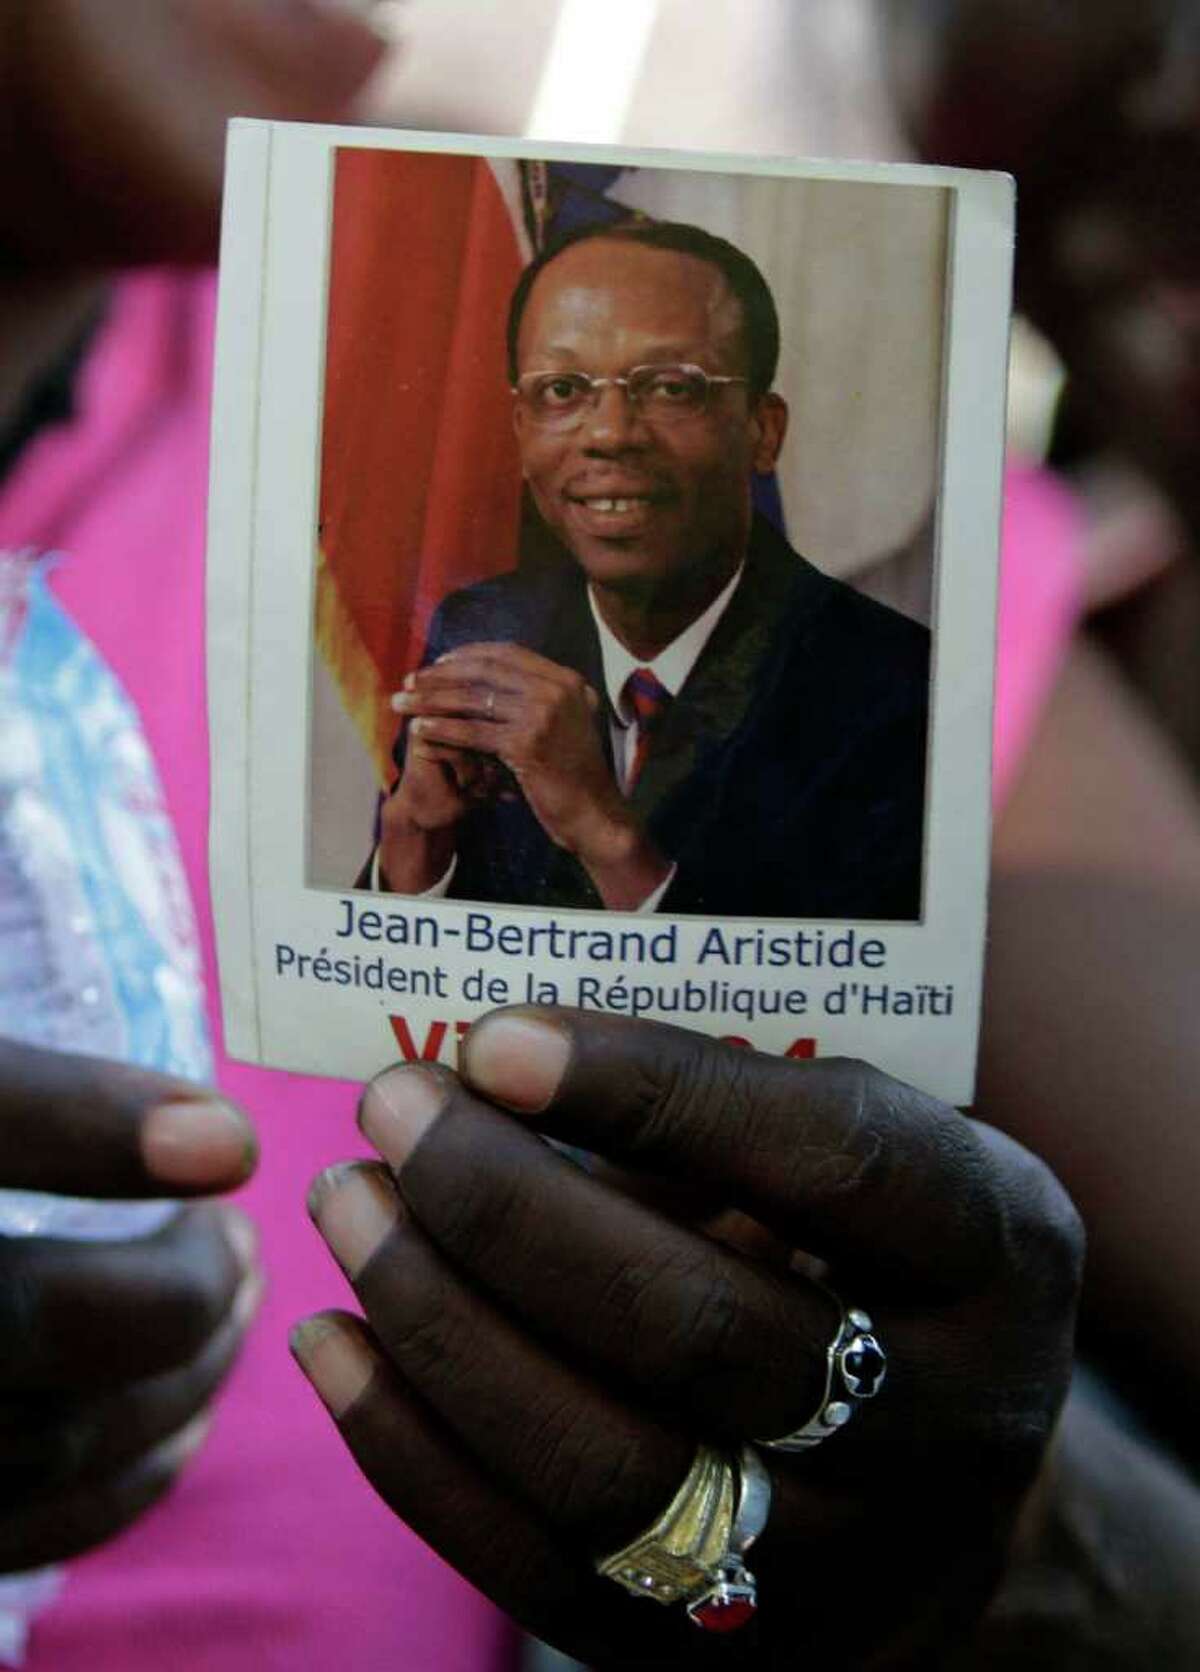 A woman holds a photo of Haiti's ousted President Jean-Bertrand Aristide during in Port-au-Prince, Haiti, Friday, March 11, 2011. Felix said supporters were planning to clean the streets of Port-au-Prince in anticipation of Aristide's return which, according to a South African official, could happen anytime before Haiti's elections next March 20. Aristide is exiled in South Africa since 2004. (AP Photo/Dieu Nalio Chery)